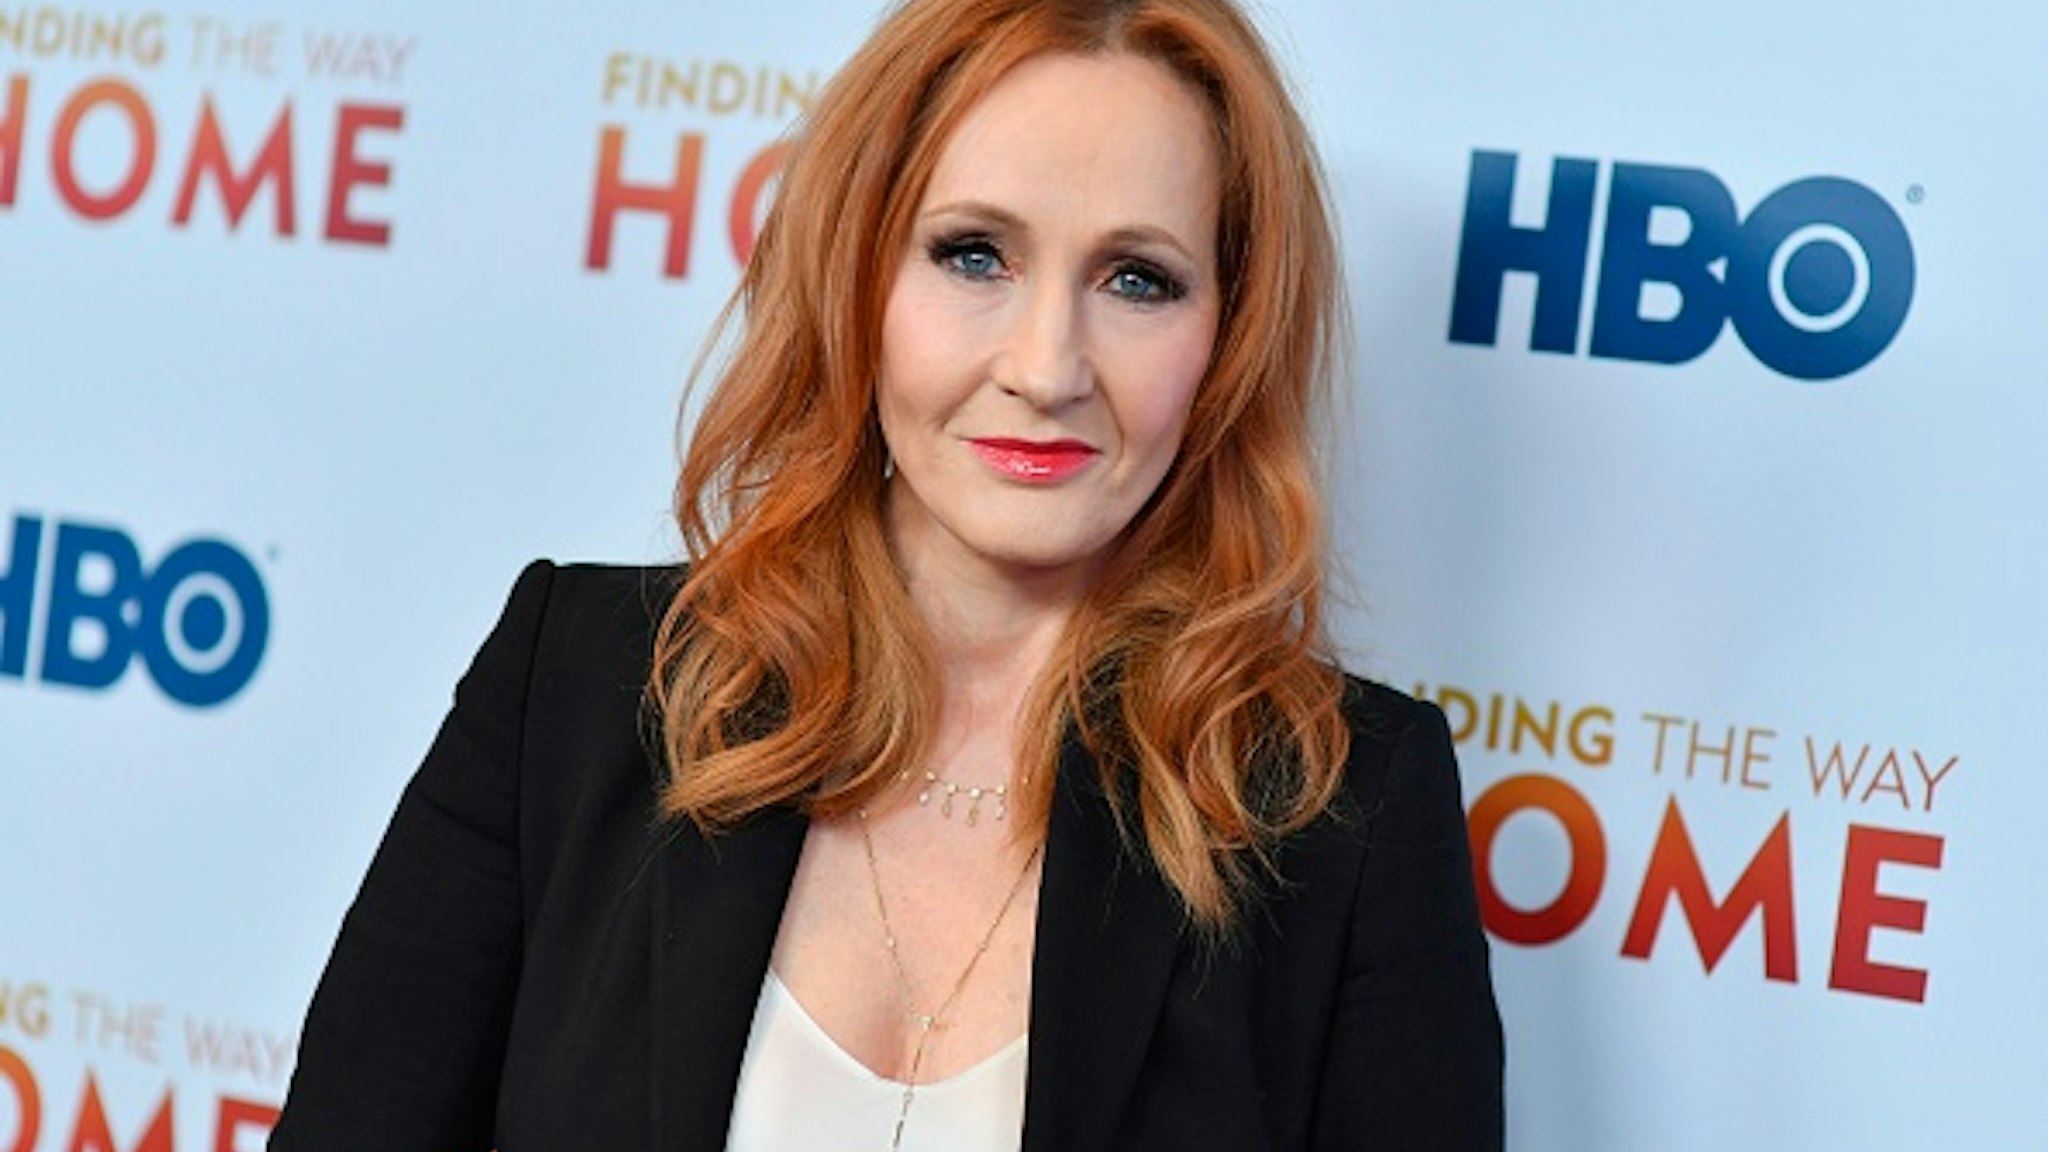 British author J. K. Rowling attends HBO's "Finding The Way Home" world premiere at Hudson Yards on December 11, 2019 in New York City.